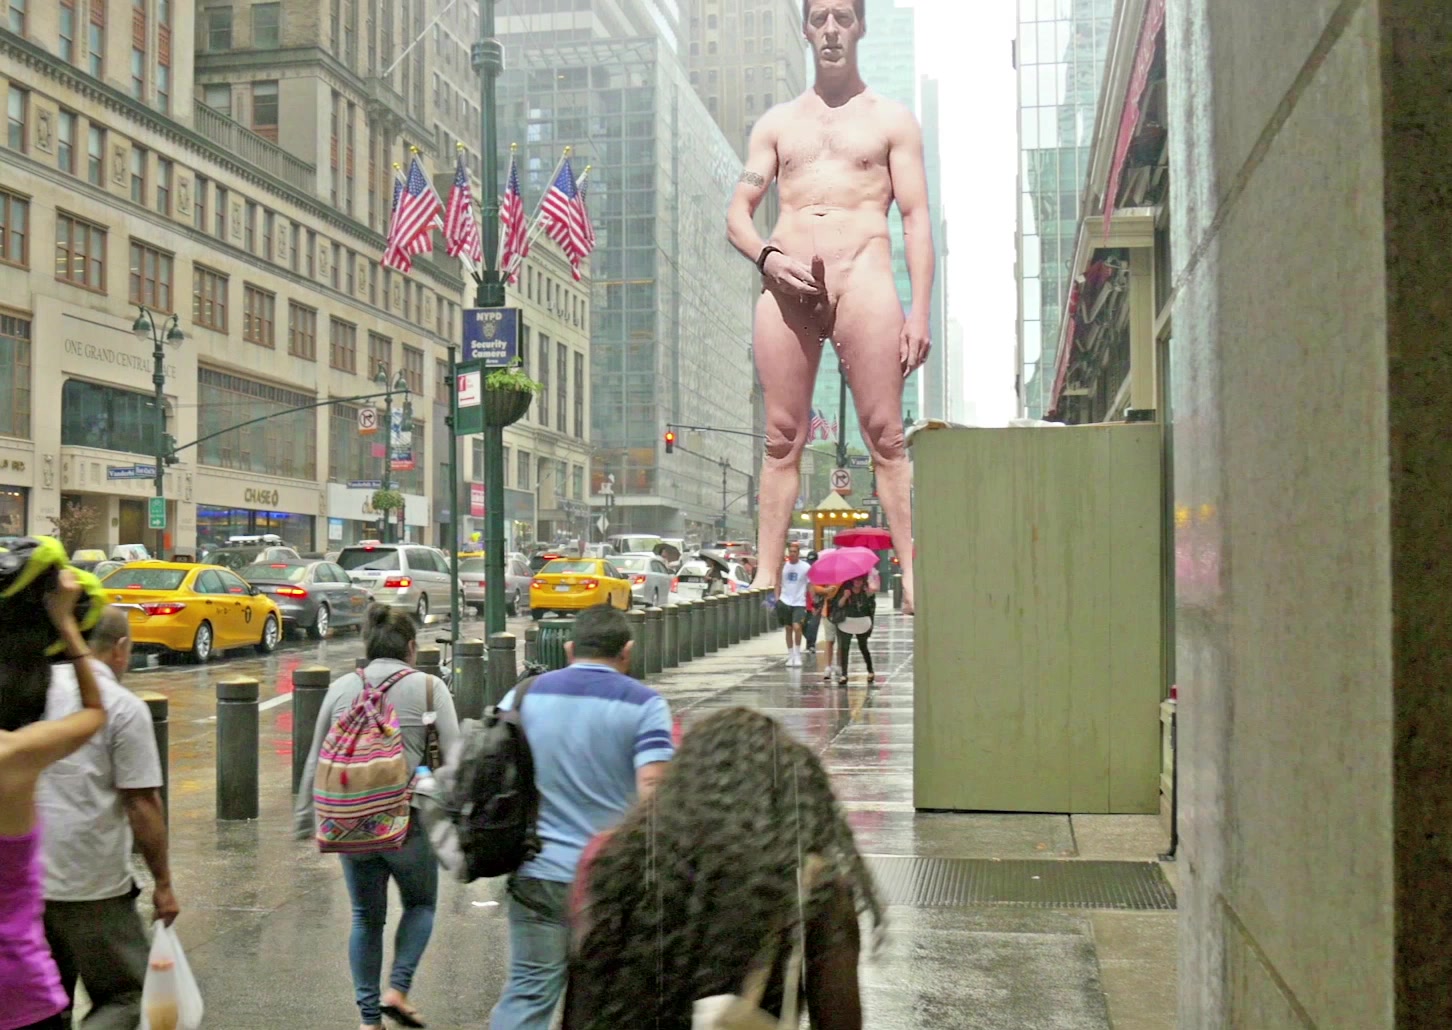 Giant pisses on tiny people in New York